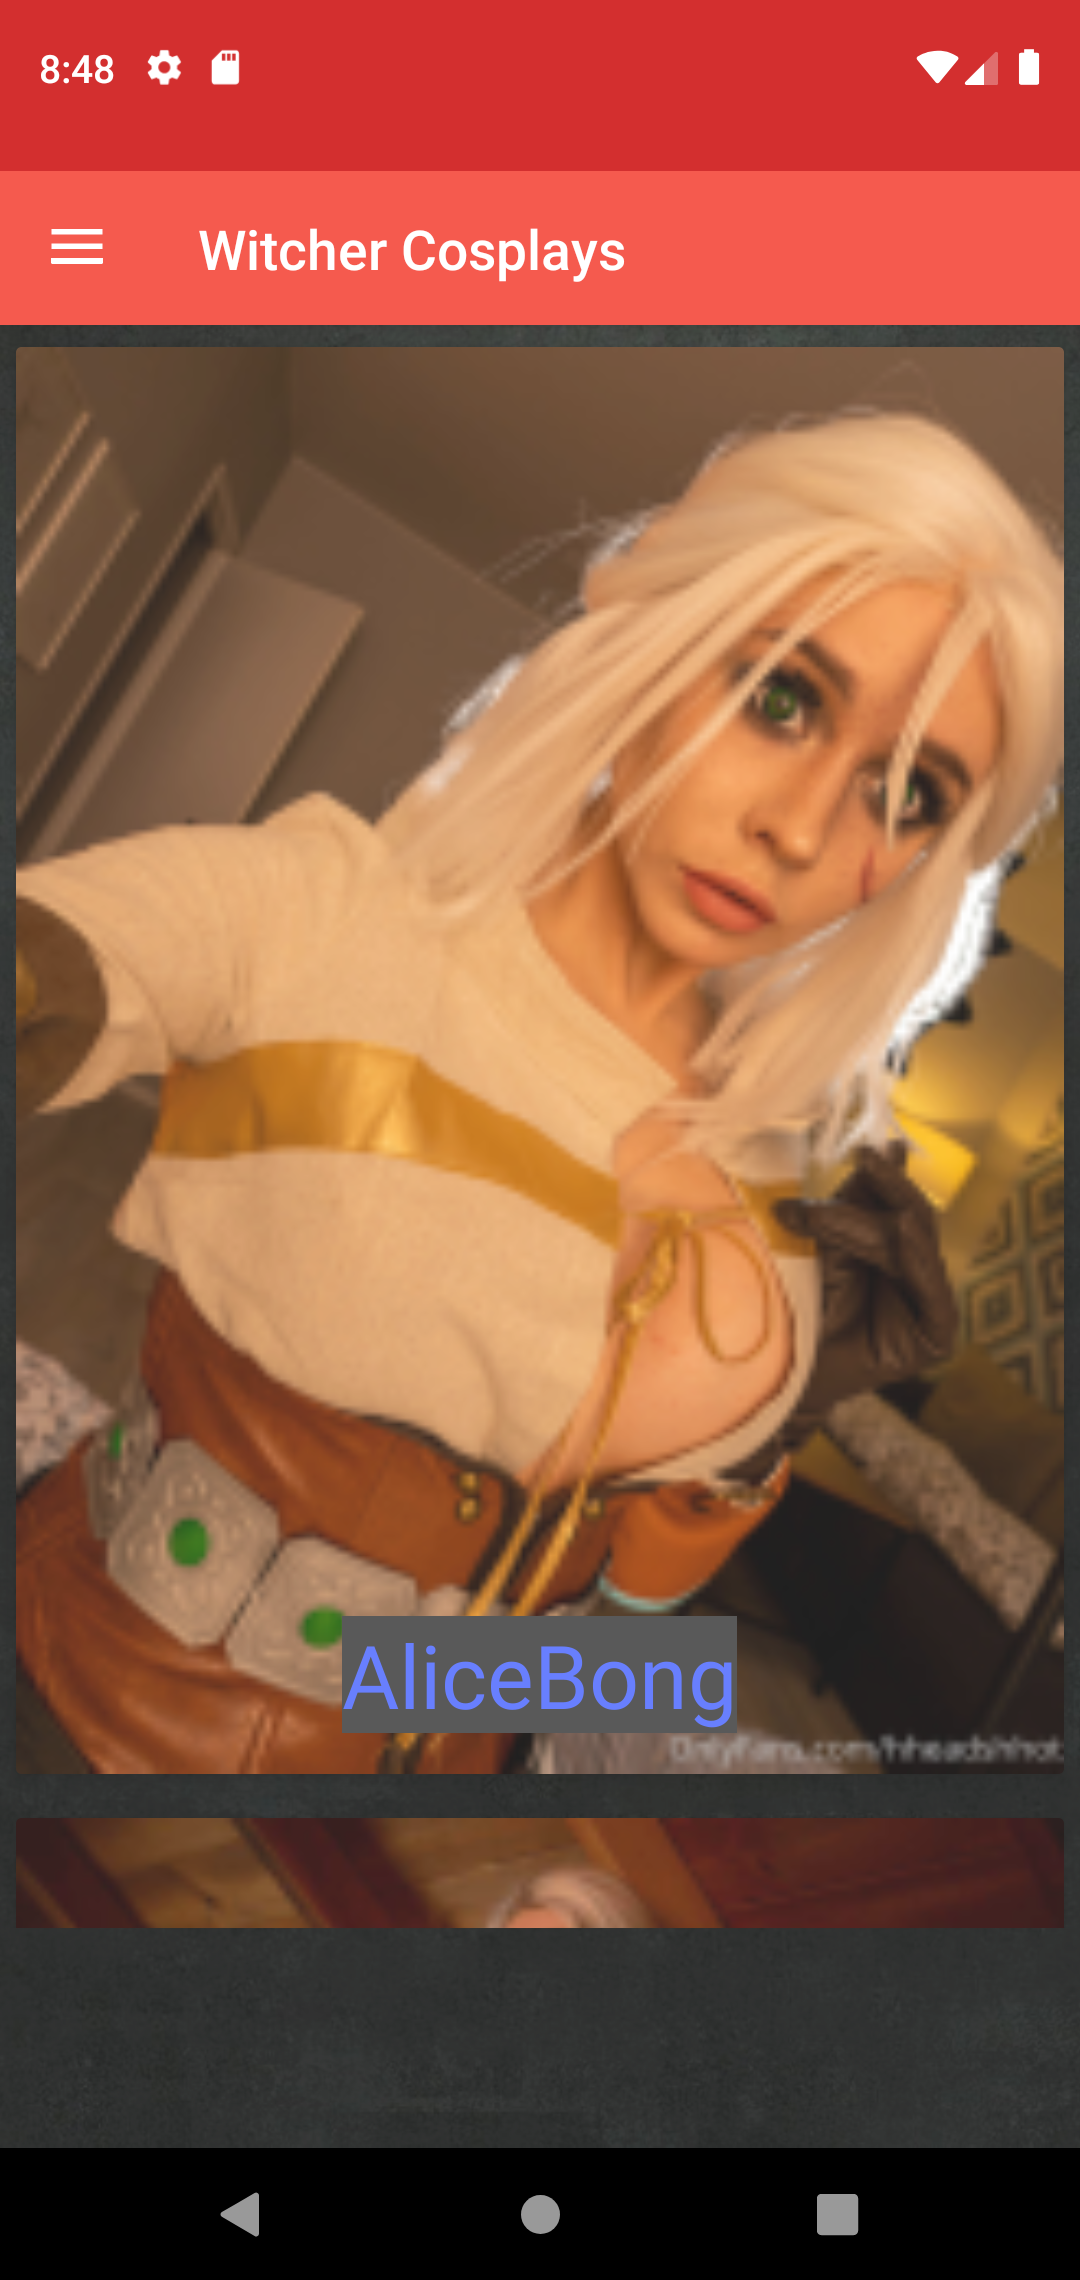 Witcher Cosplays comics,pic,cosplay,topless,witcher,wallpapers,manga,sexy,hentai,pornstar,photo,تطبيق,pics,wallpaper,app,صور,android,pica,packs,هنتاي,collection,gallery,hot,download,erotic,anime,heanti